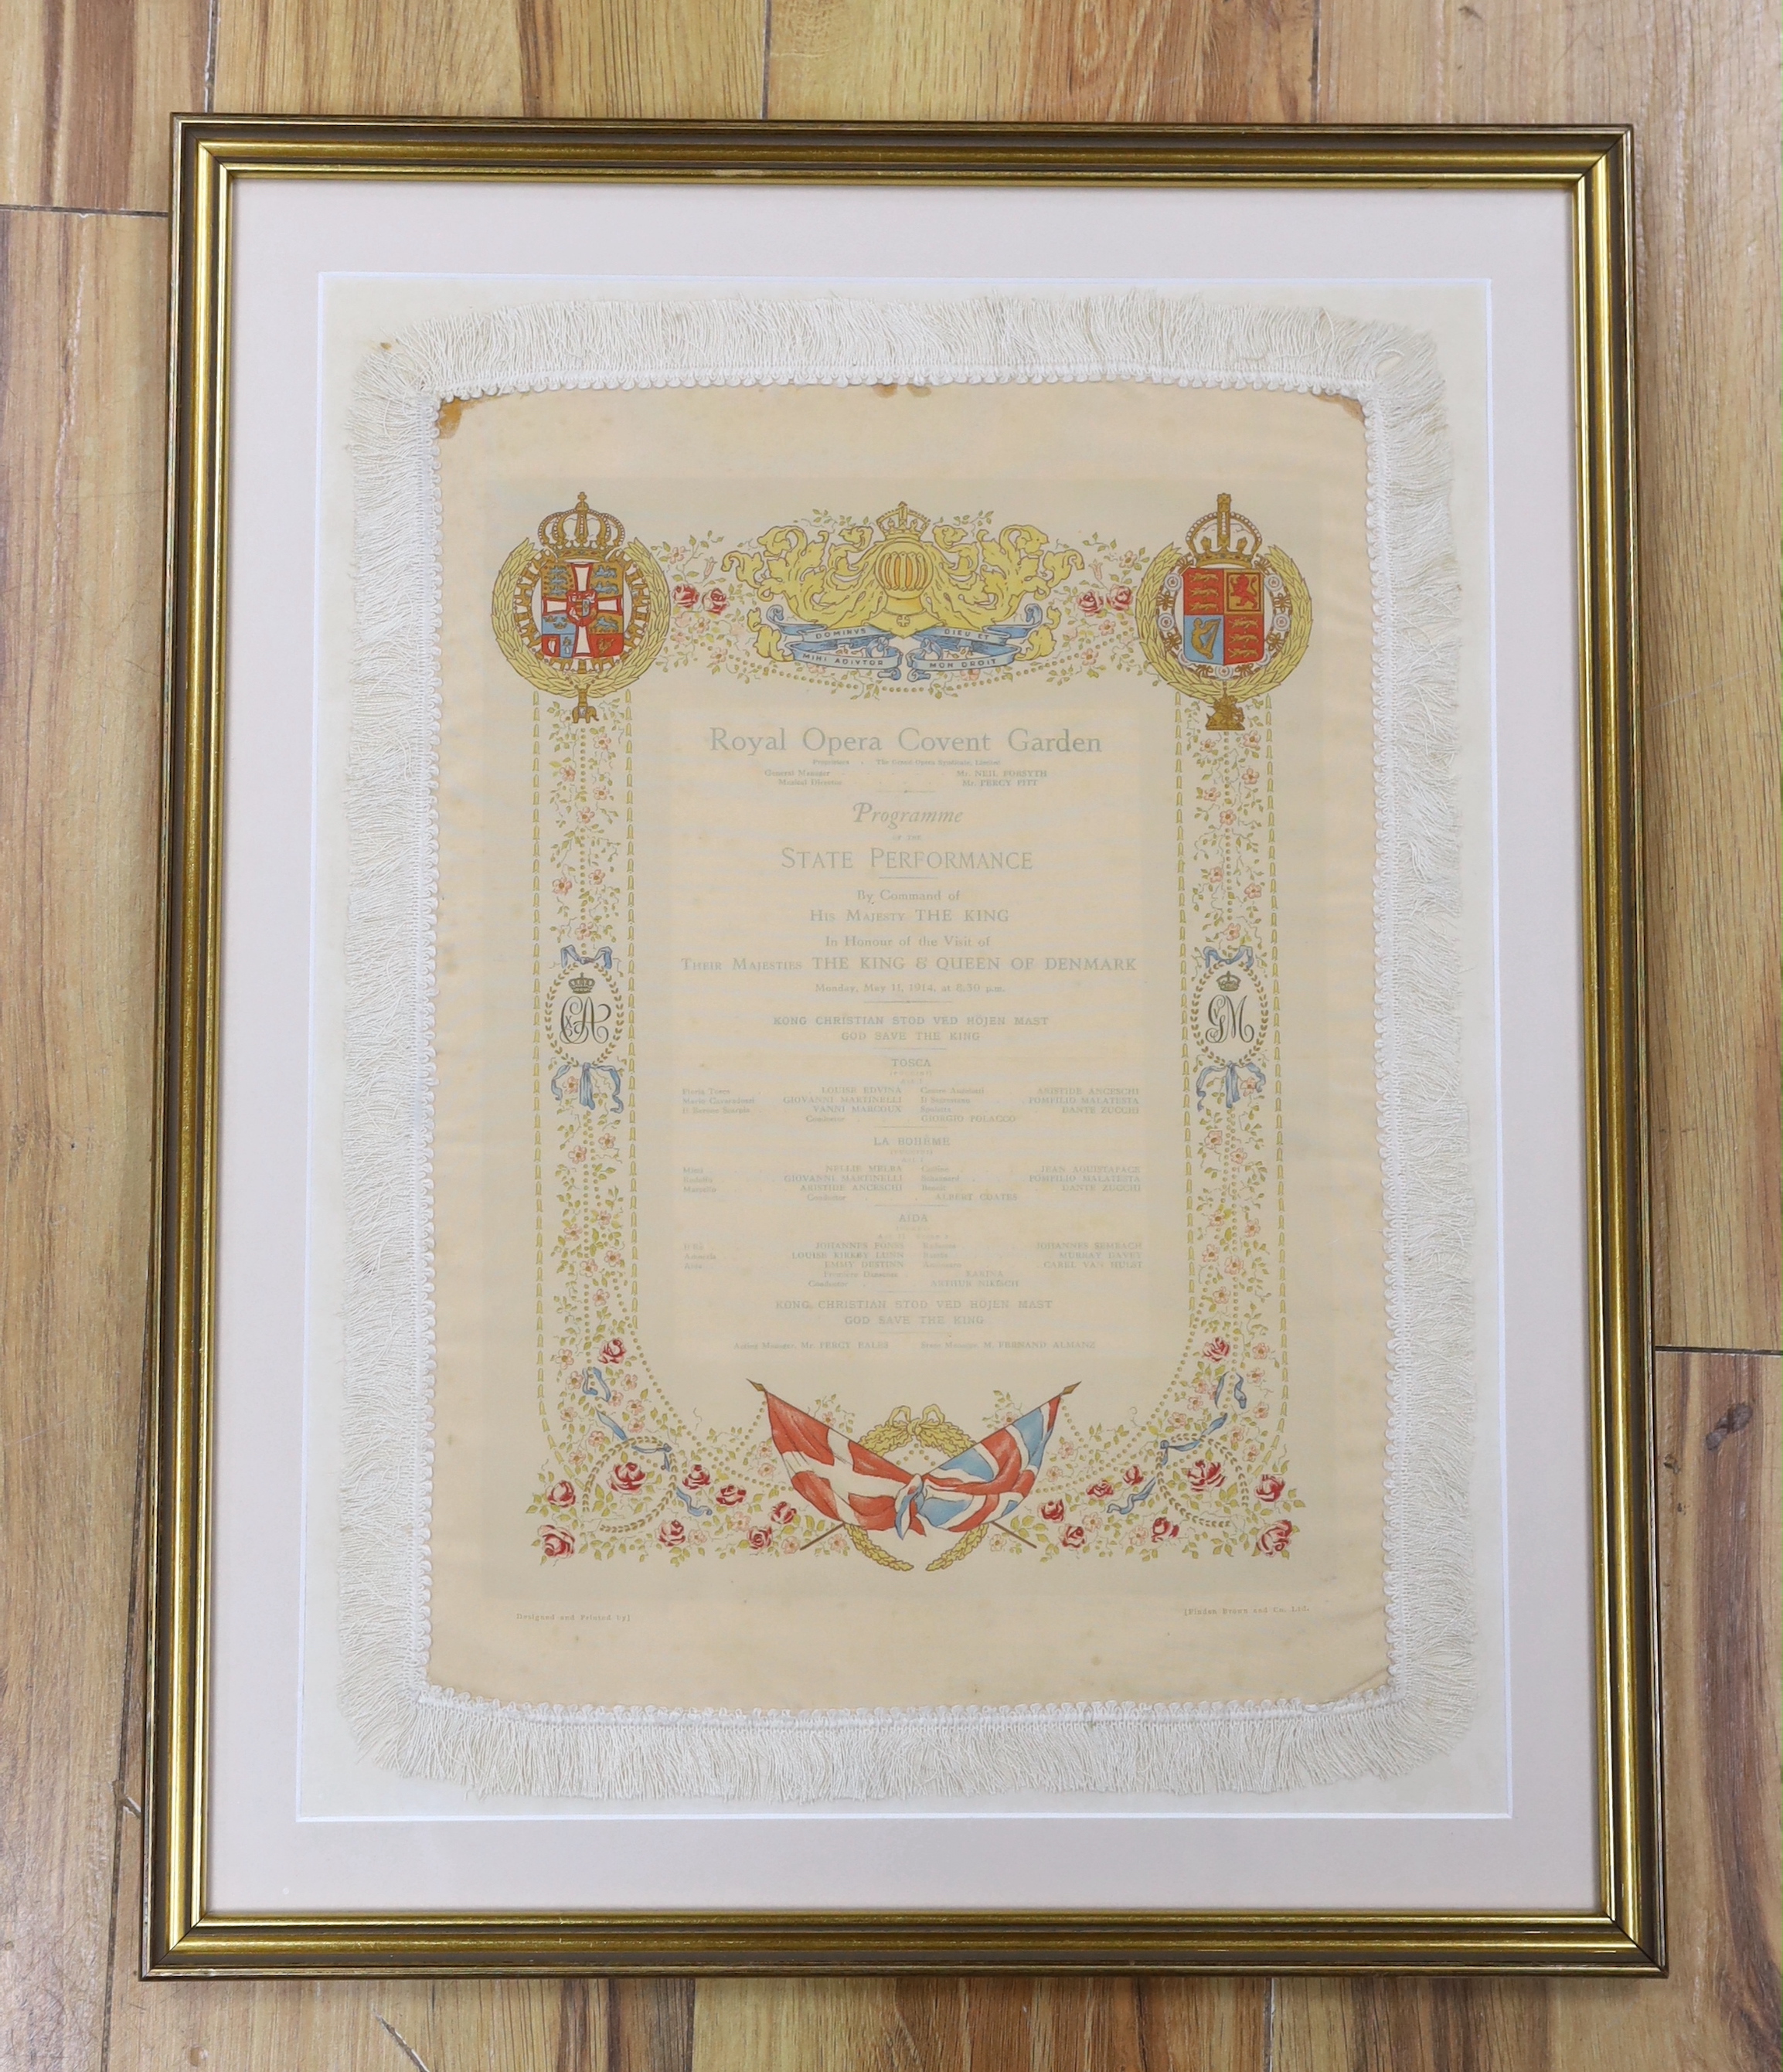 A framed early 20th century silk opera programme, Royal Opera House Covent Garden, State Performance 11th May 1914, printed by Finden Brown & Co., 38 x 27cm not including fringe